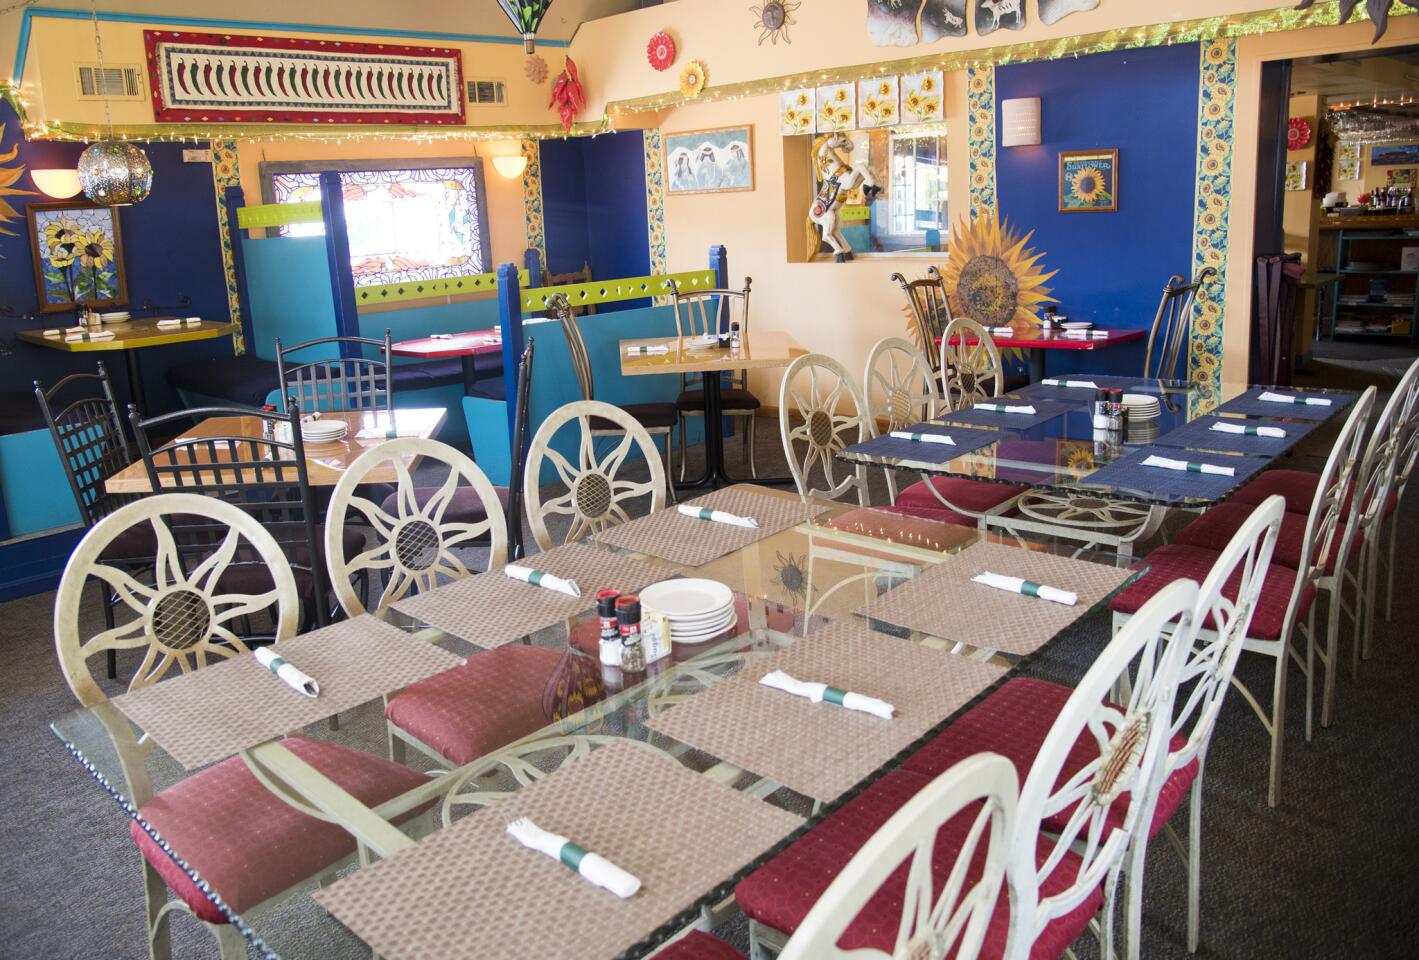 The dining area is colorfully decorated at Lista's Grill in Pasadena.